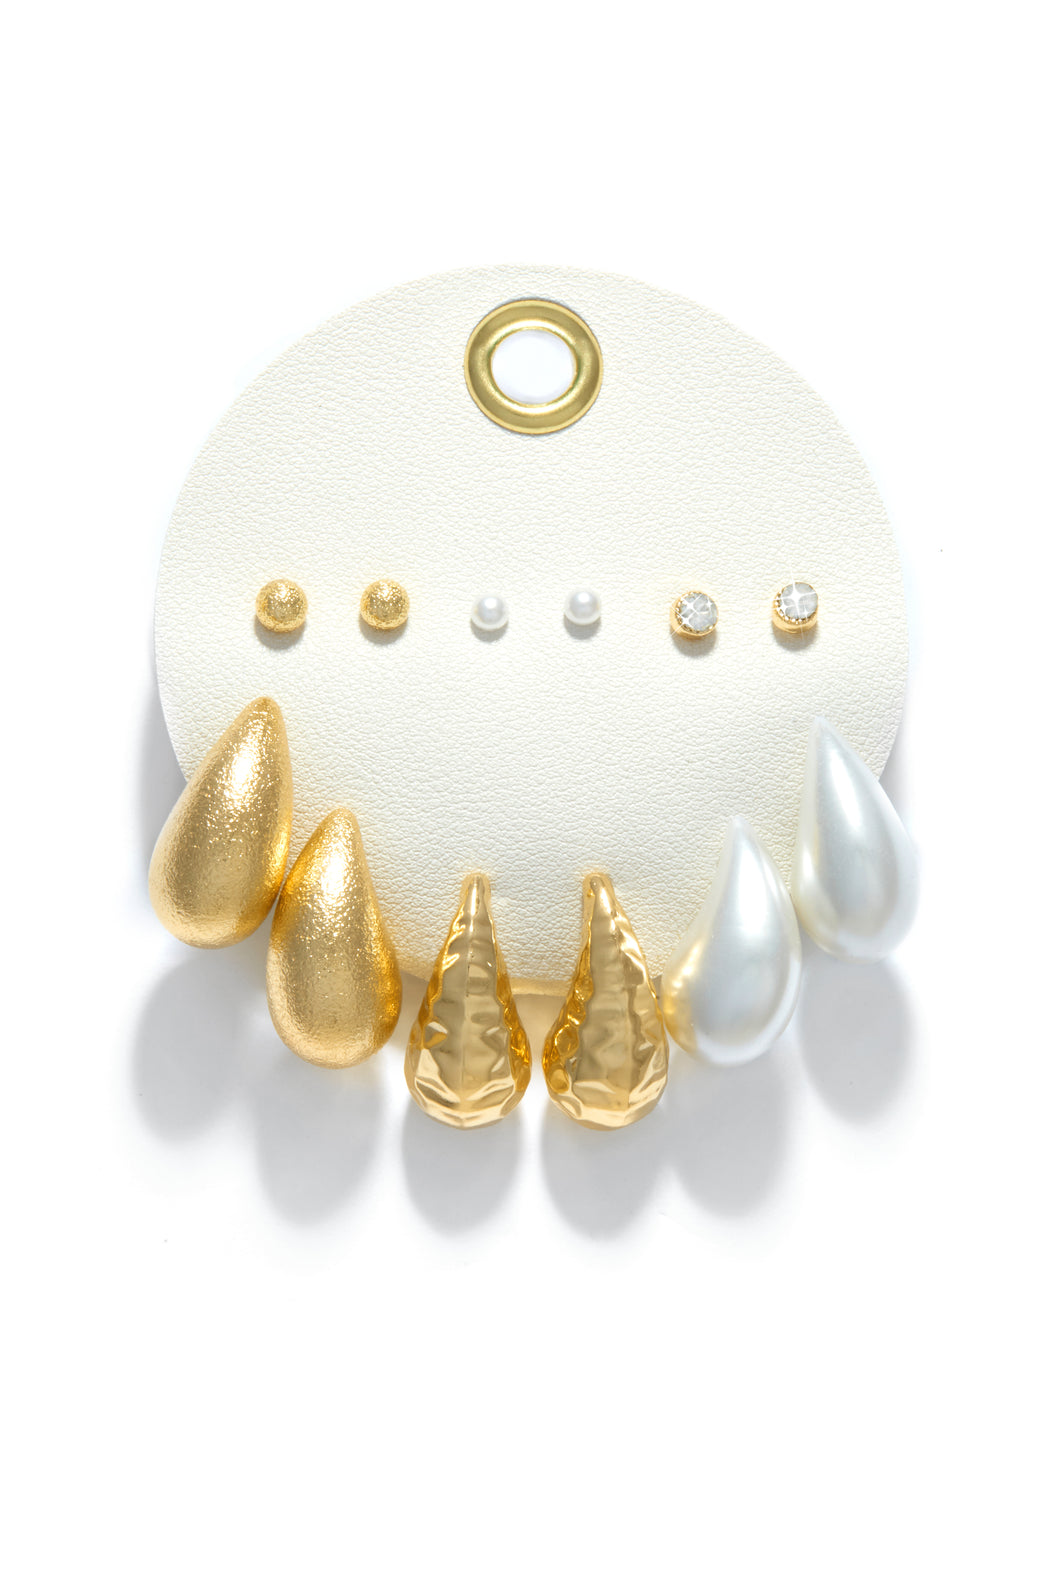 6 Piece White and Gold Earring